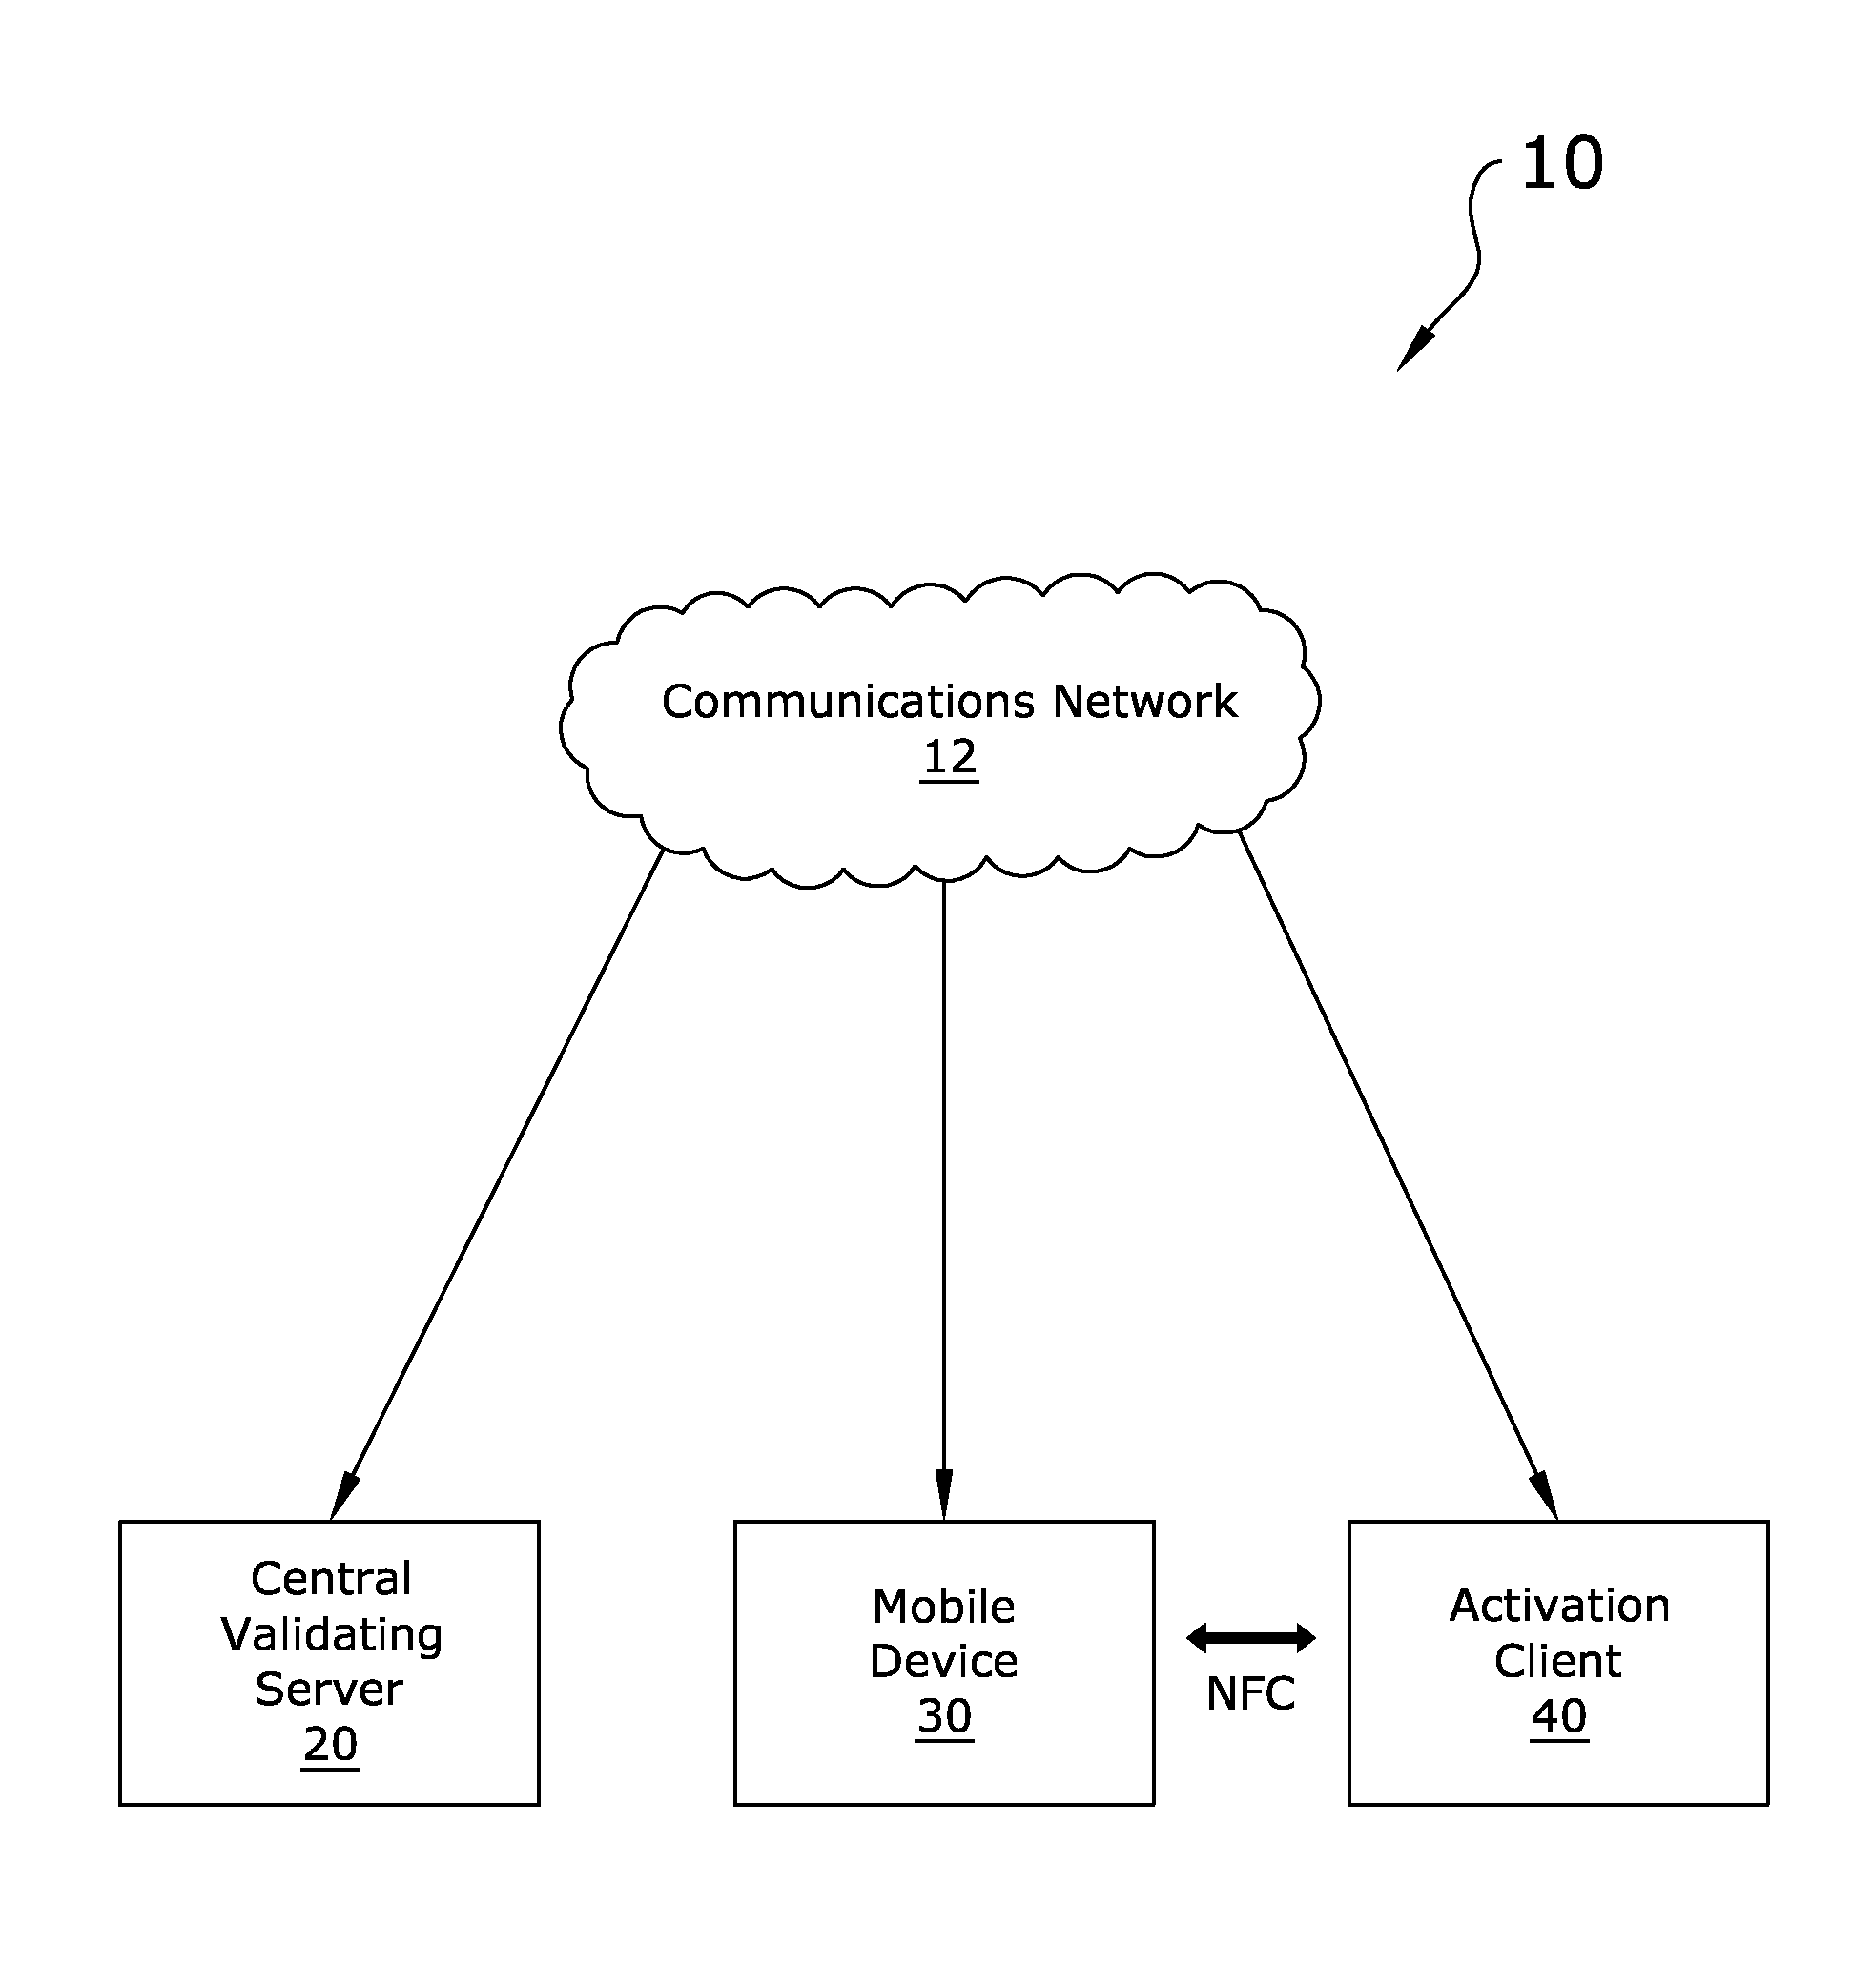 System and Method for Data Verification Using a Smart Phone